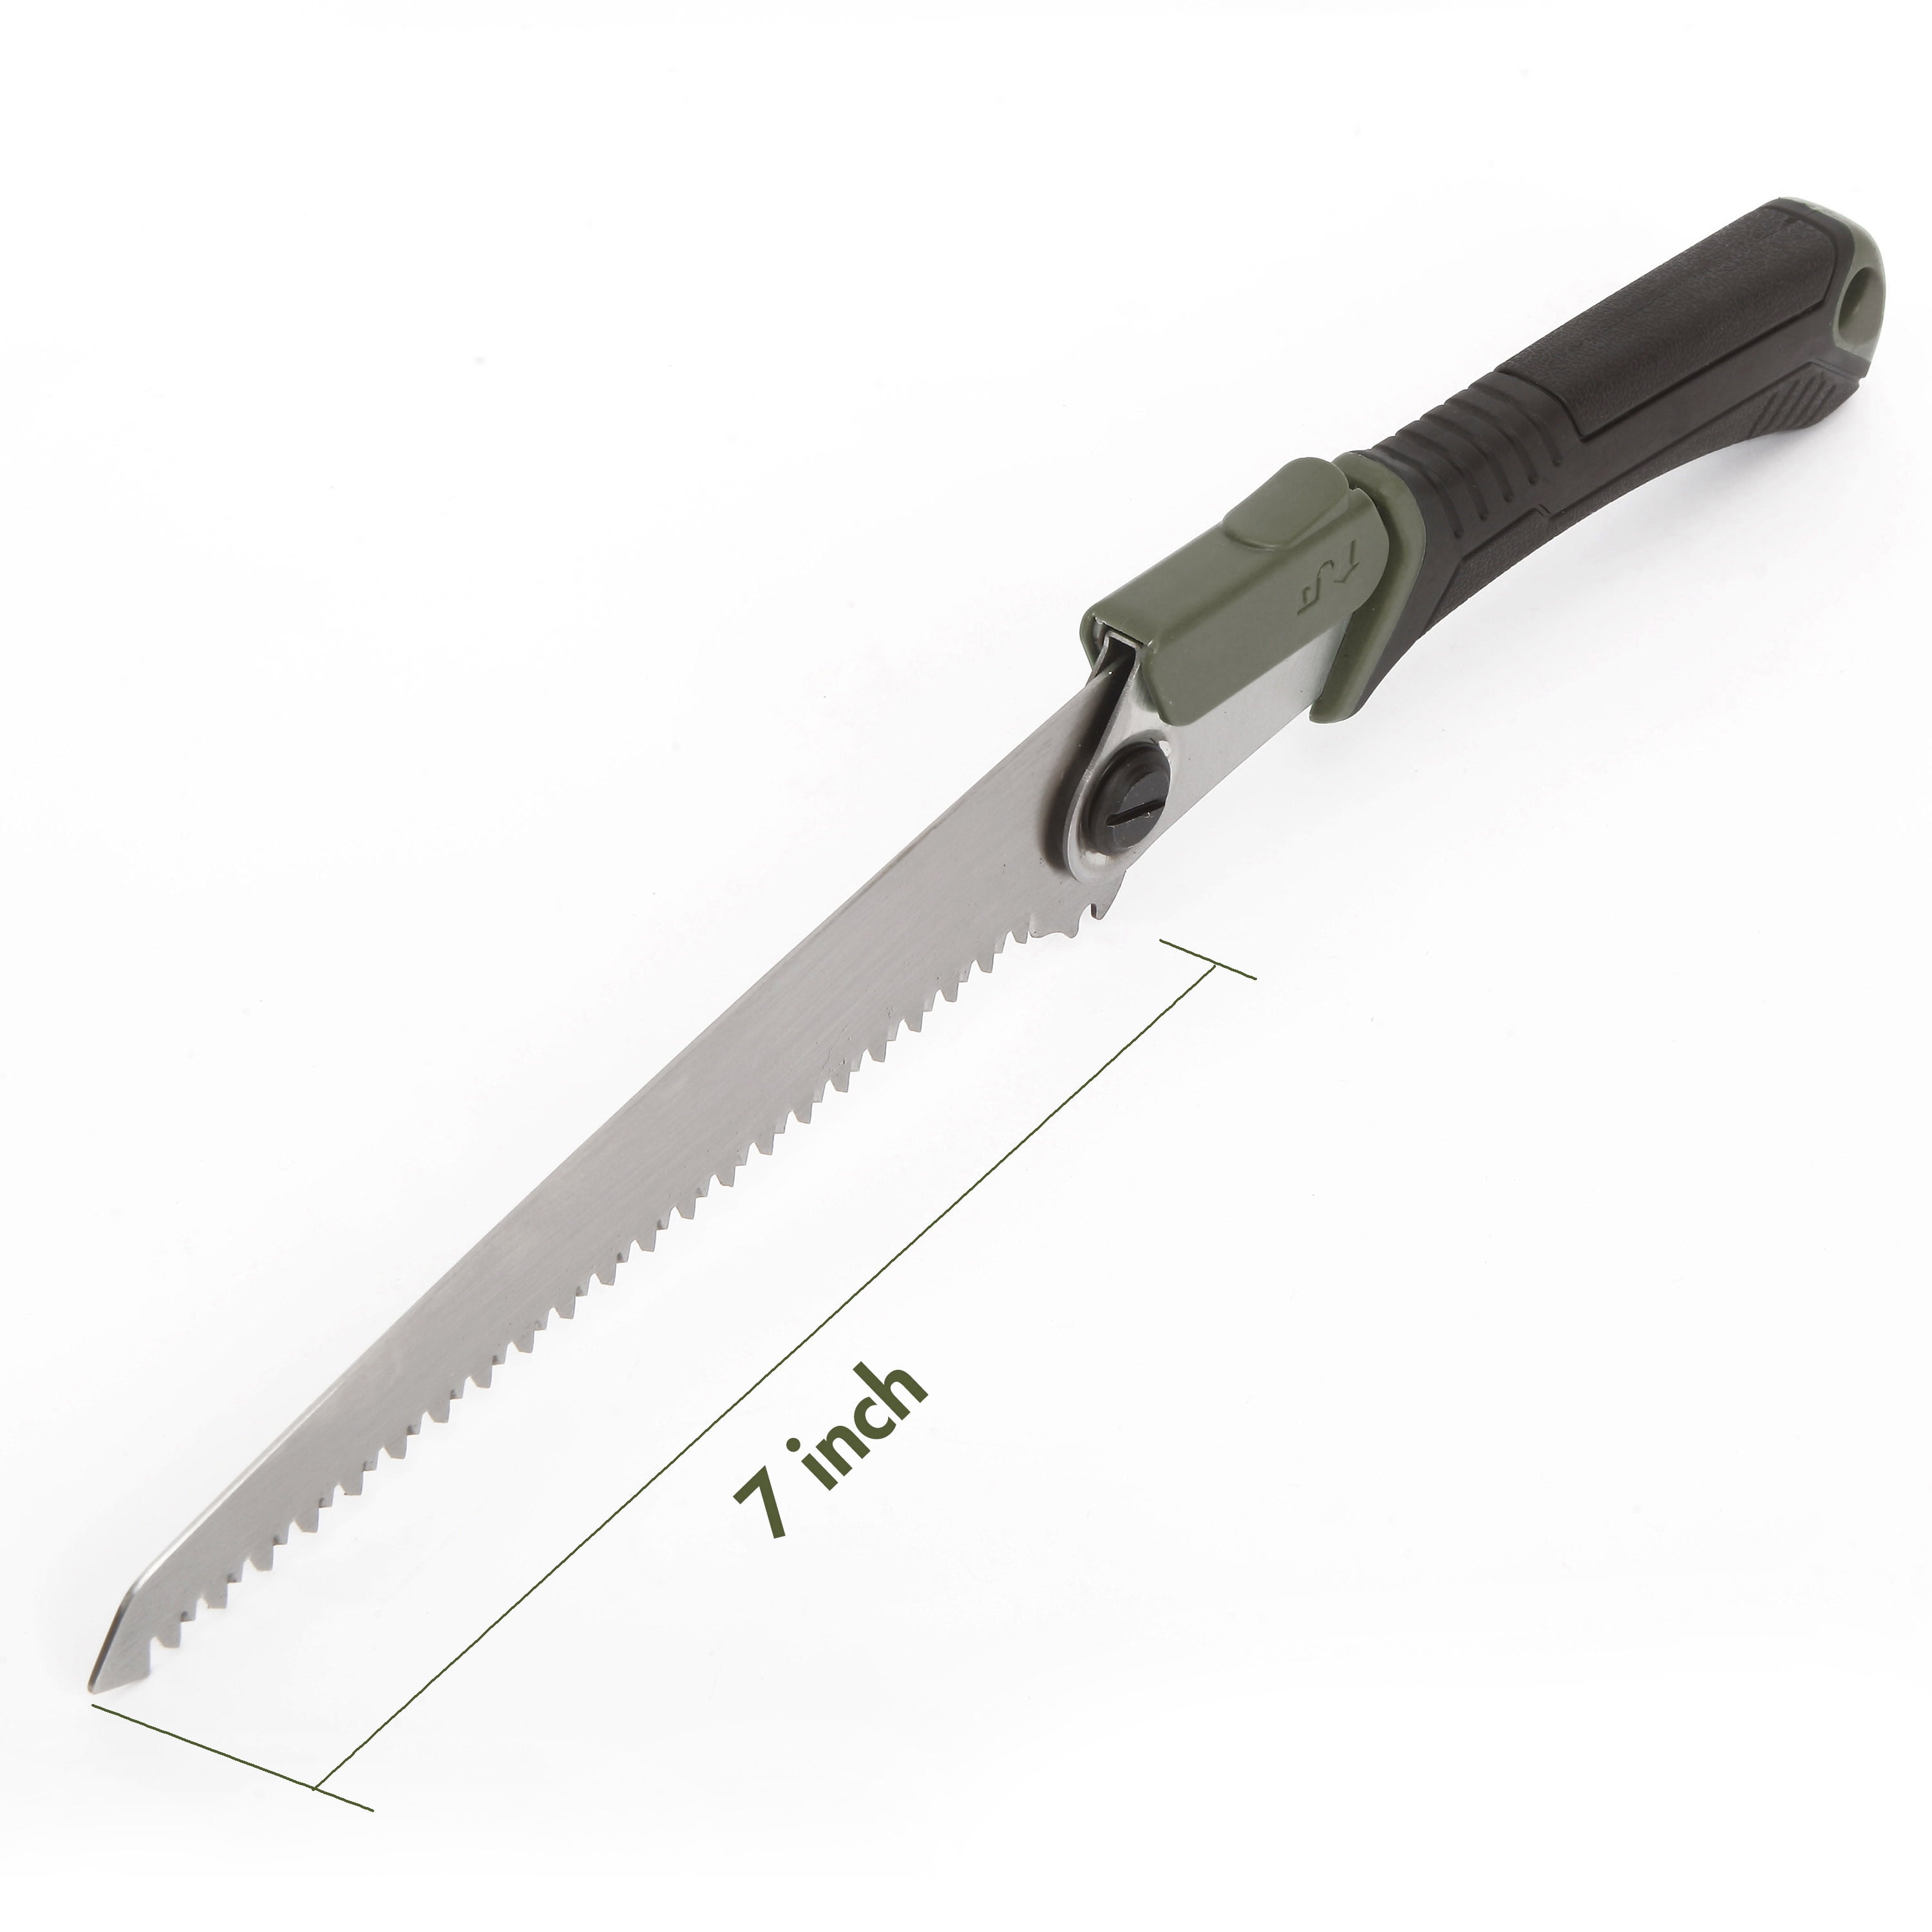 Hme Products Folding Saw With Hand Protector for sale online 